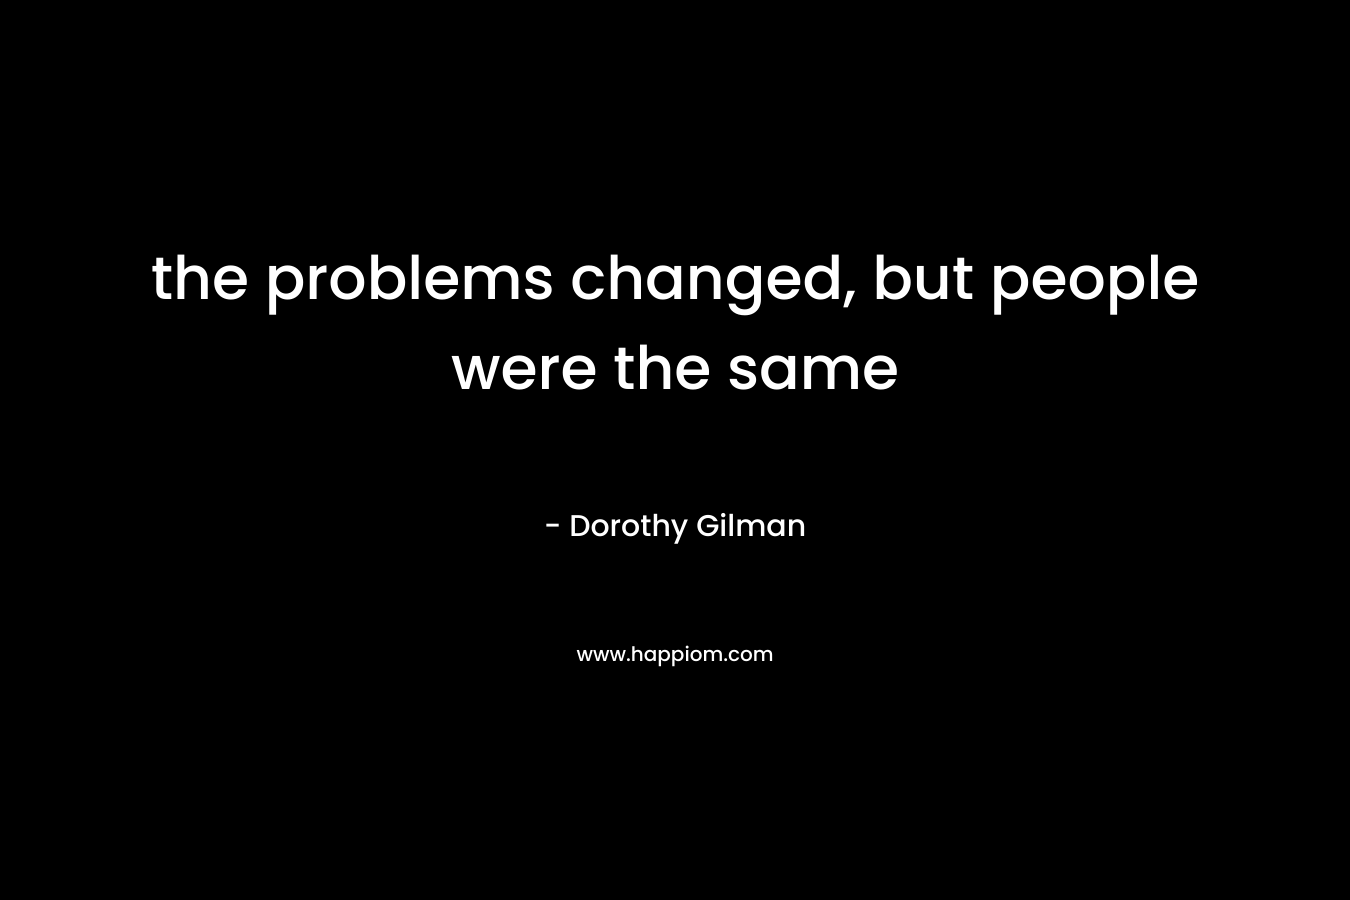 the problems changed, but people were the same